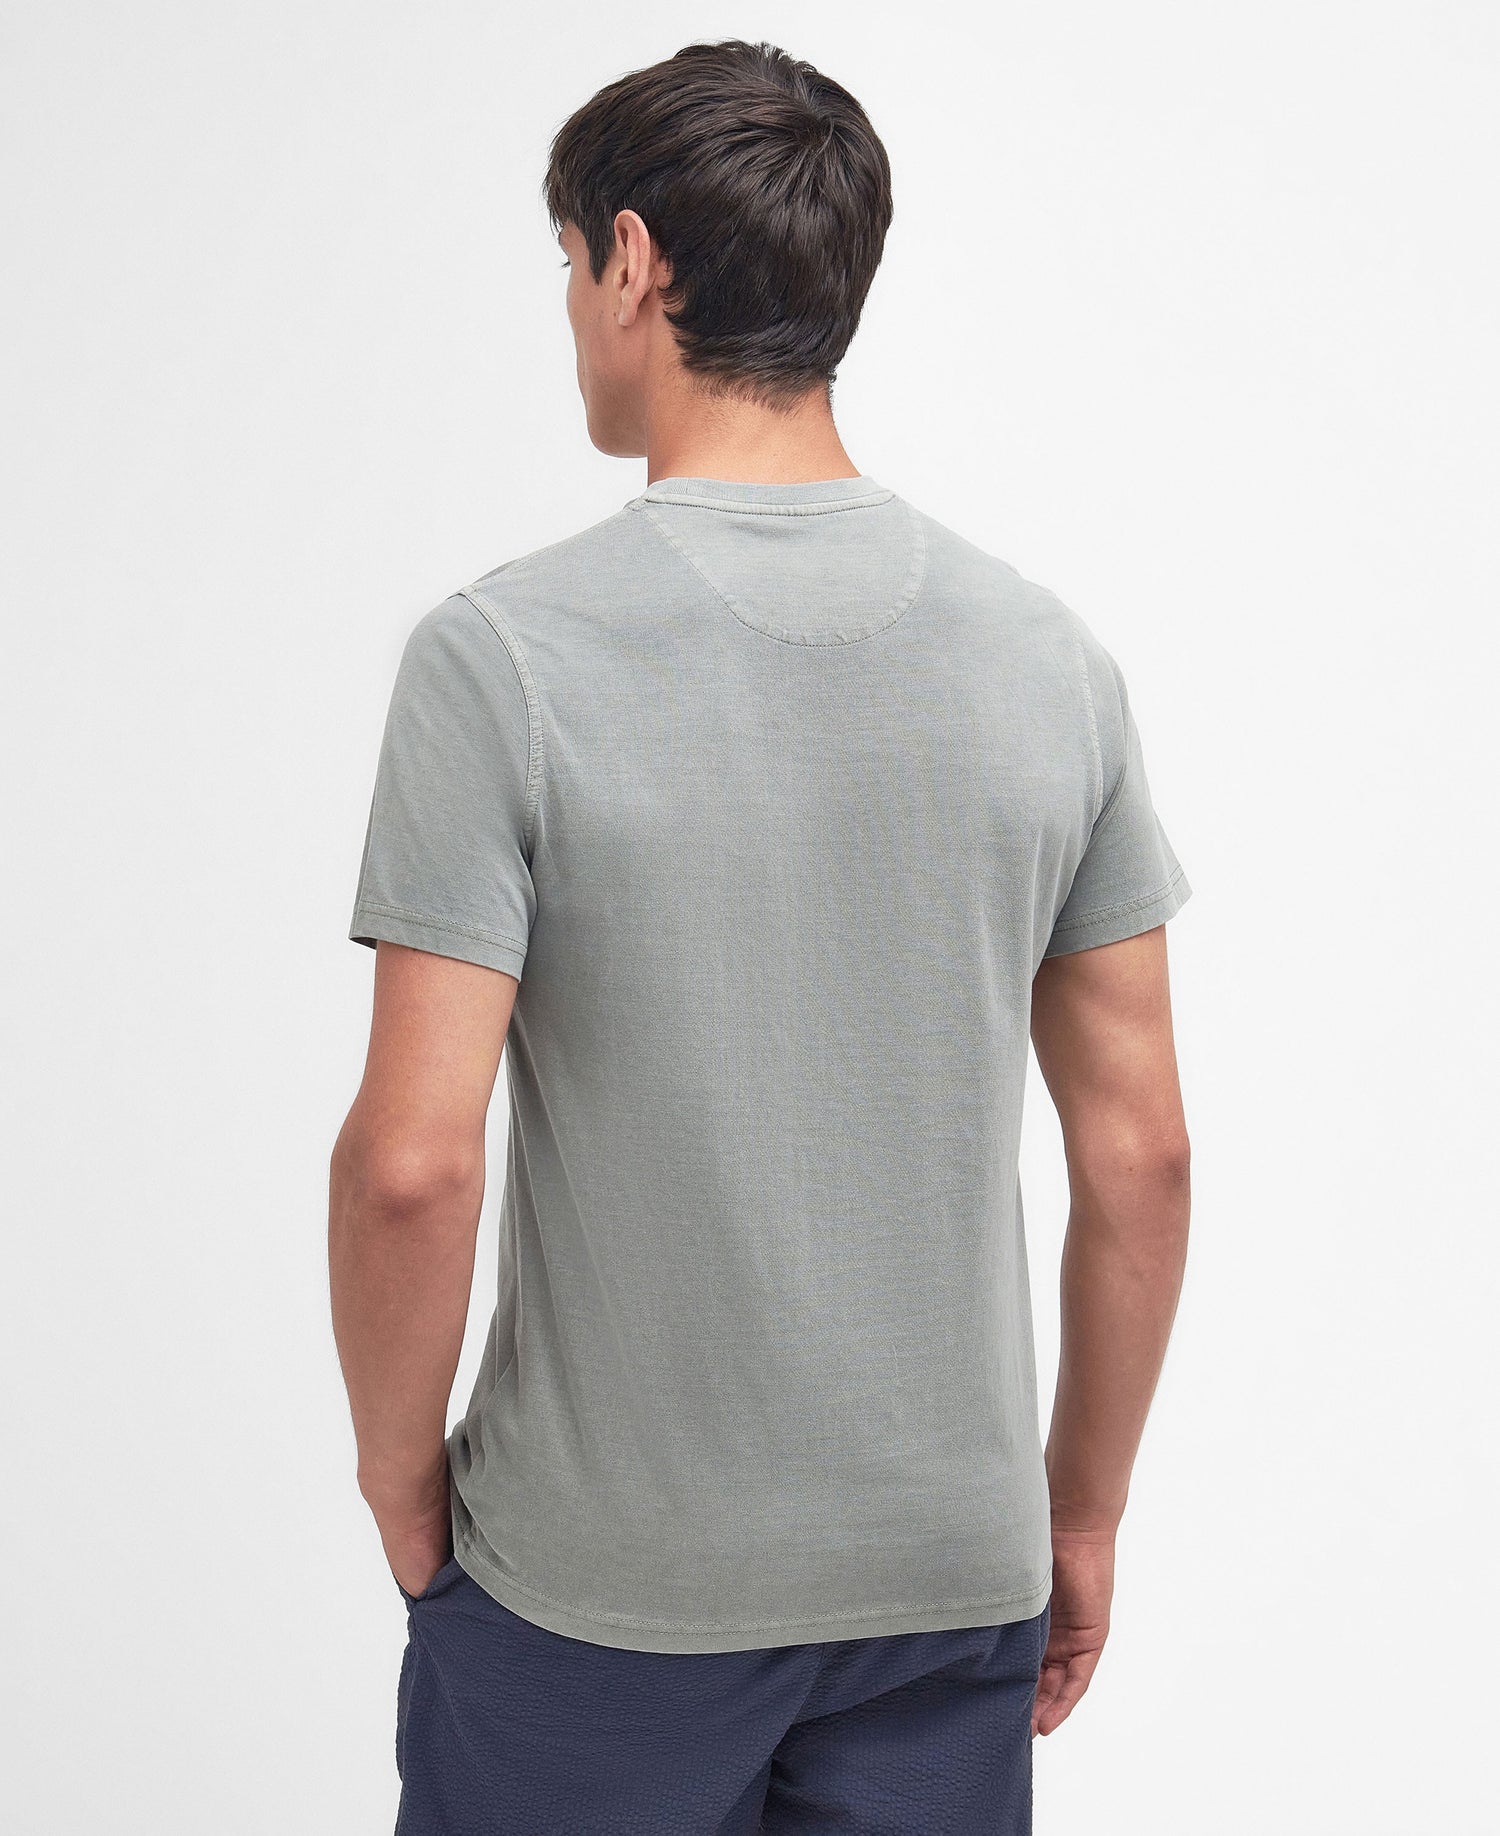 Garment Dyed Tee - Agave Green